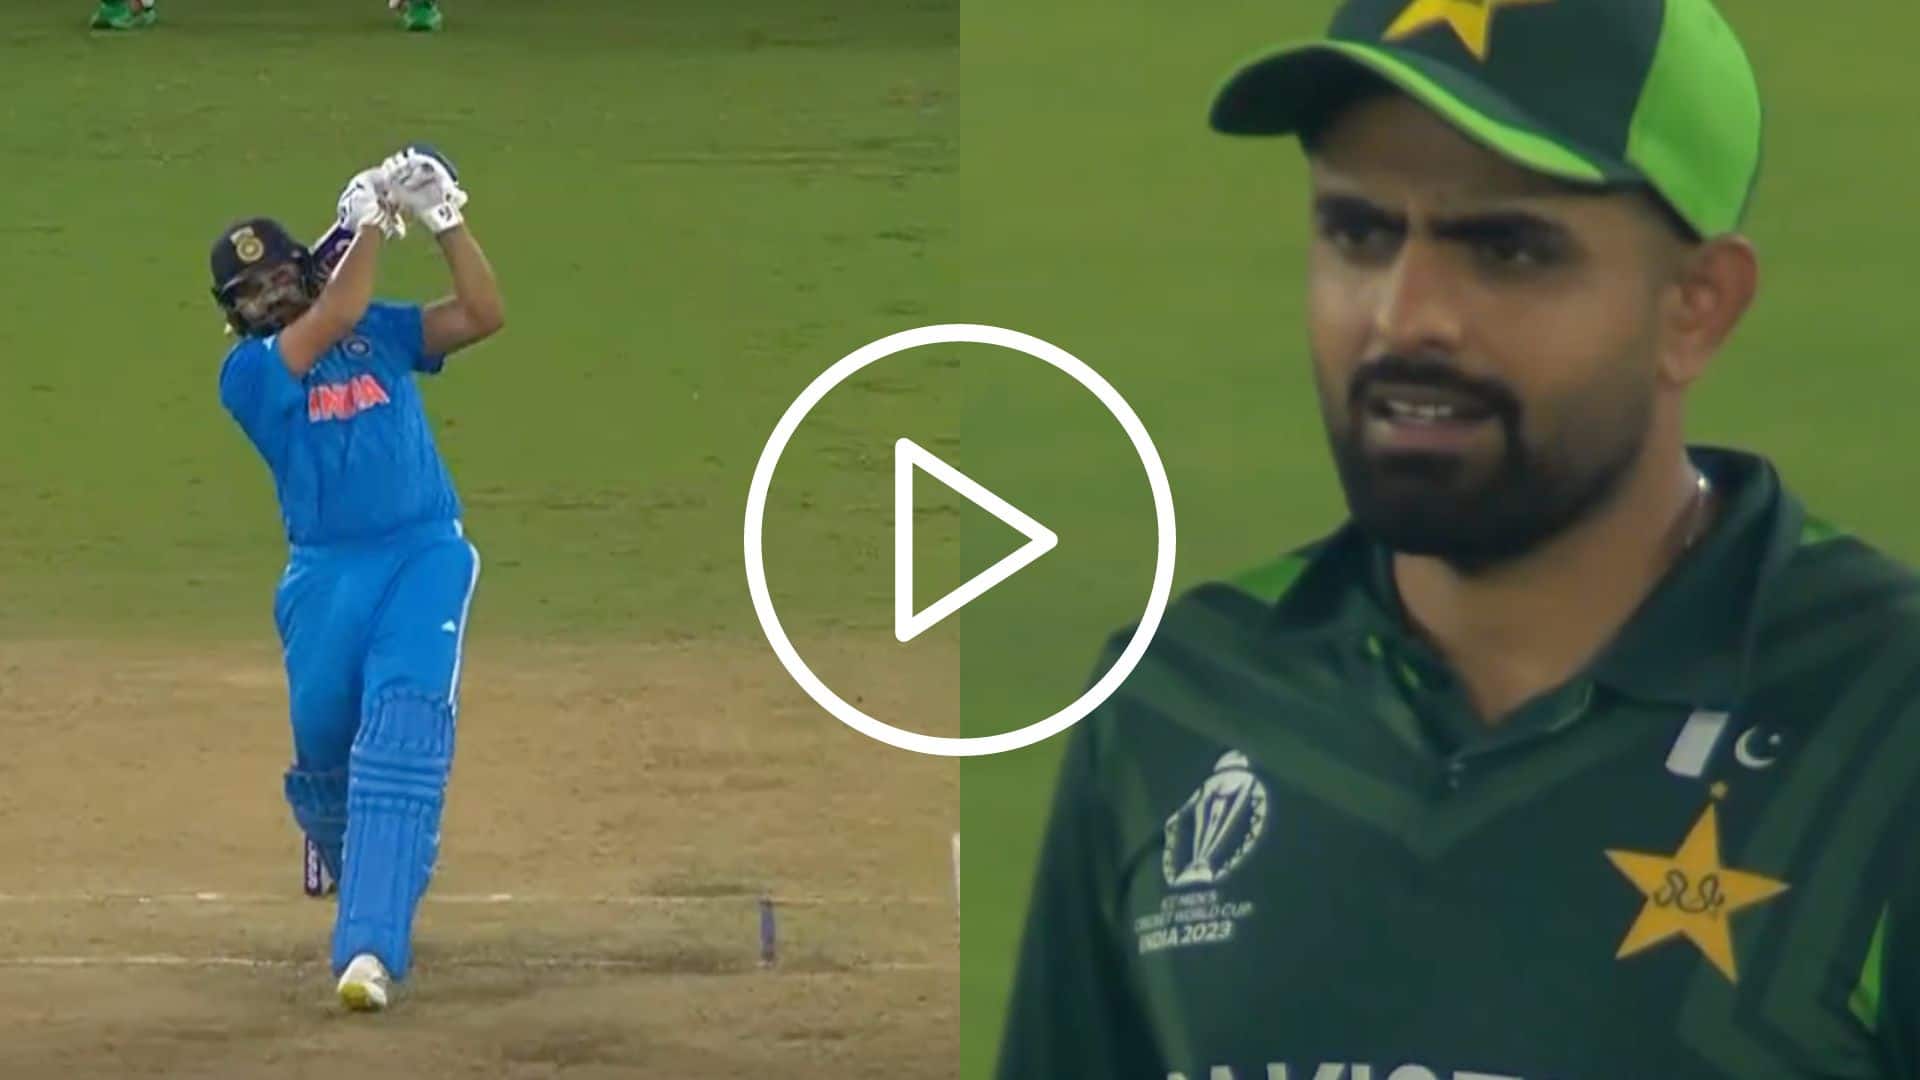 [Watch] Rohit Sharma Completes 300 ODI Sixes With A Glorious Hit Off Haris Rauf